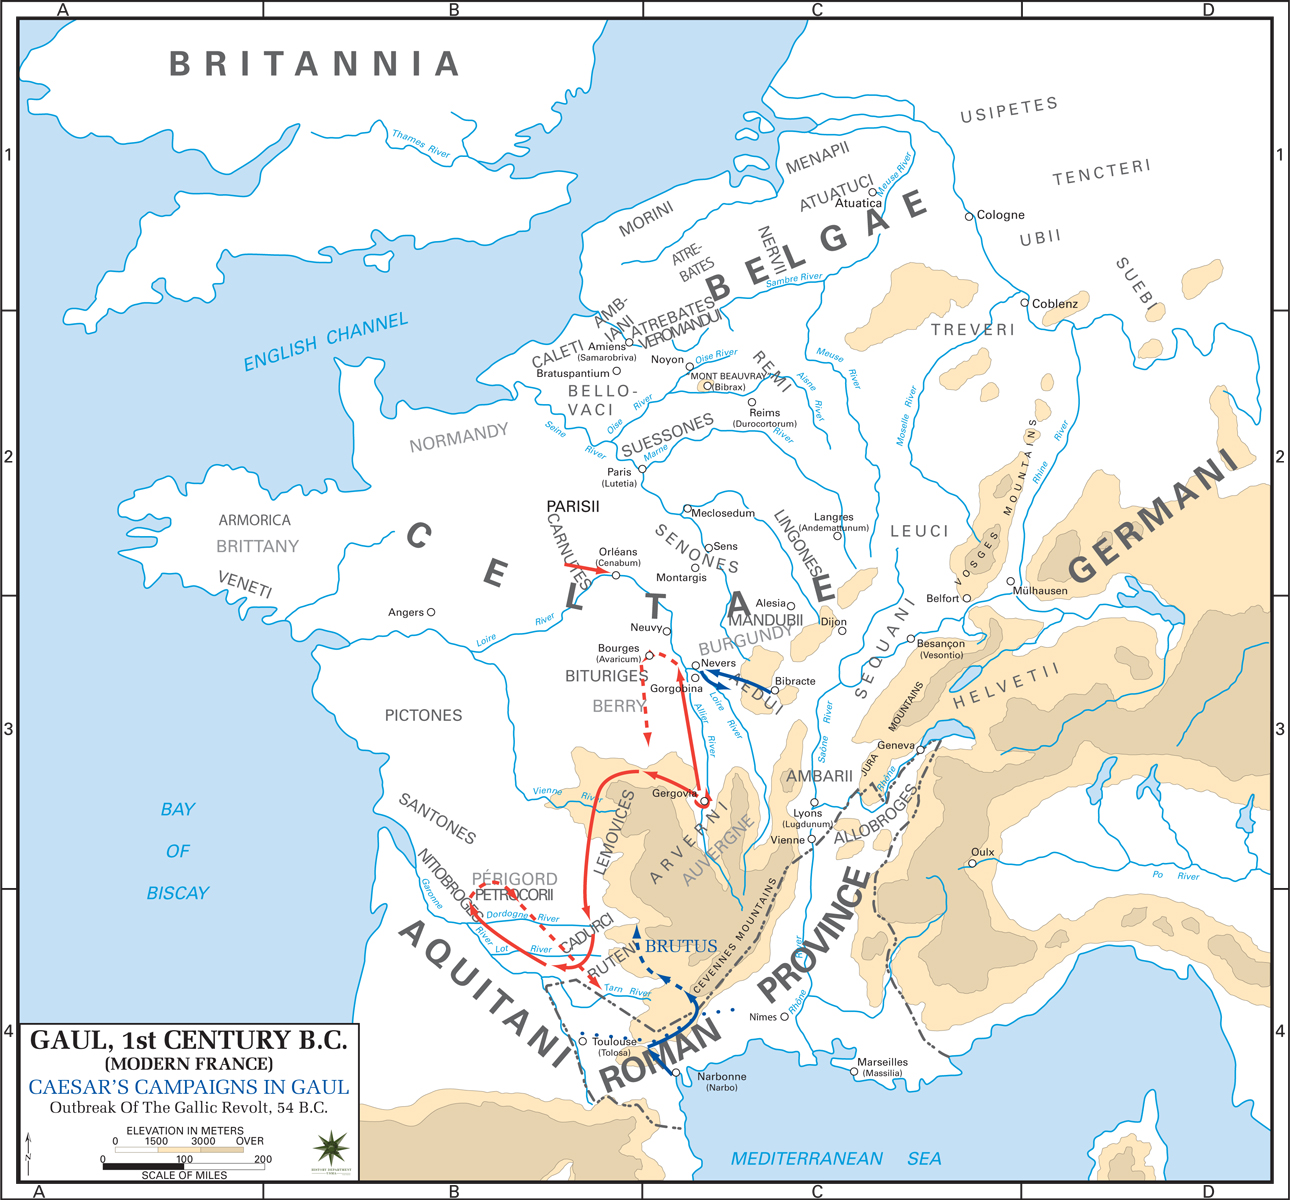 Map of Gaul - 1st Century BC: Outbreak of the Gallic Revolt